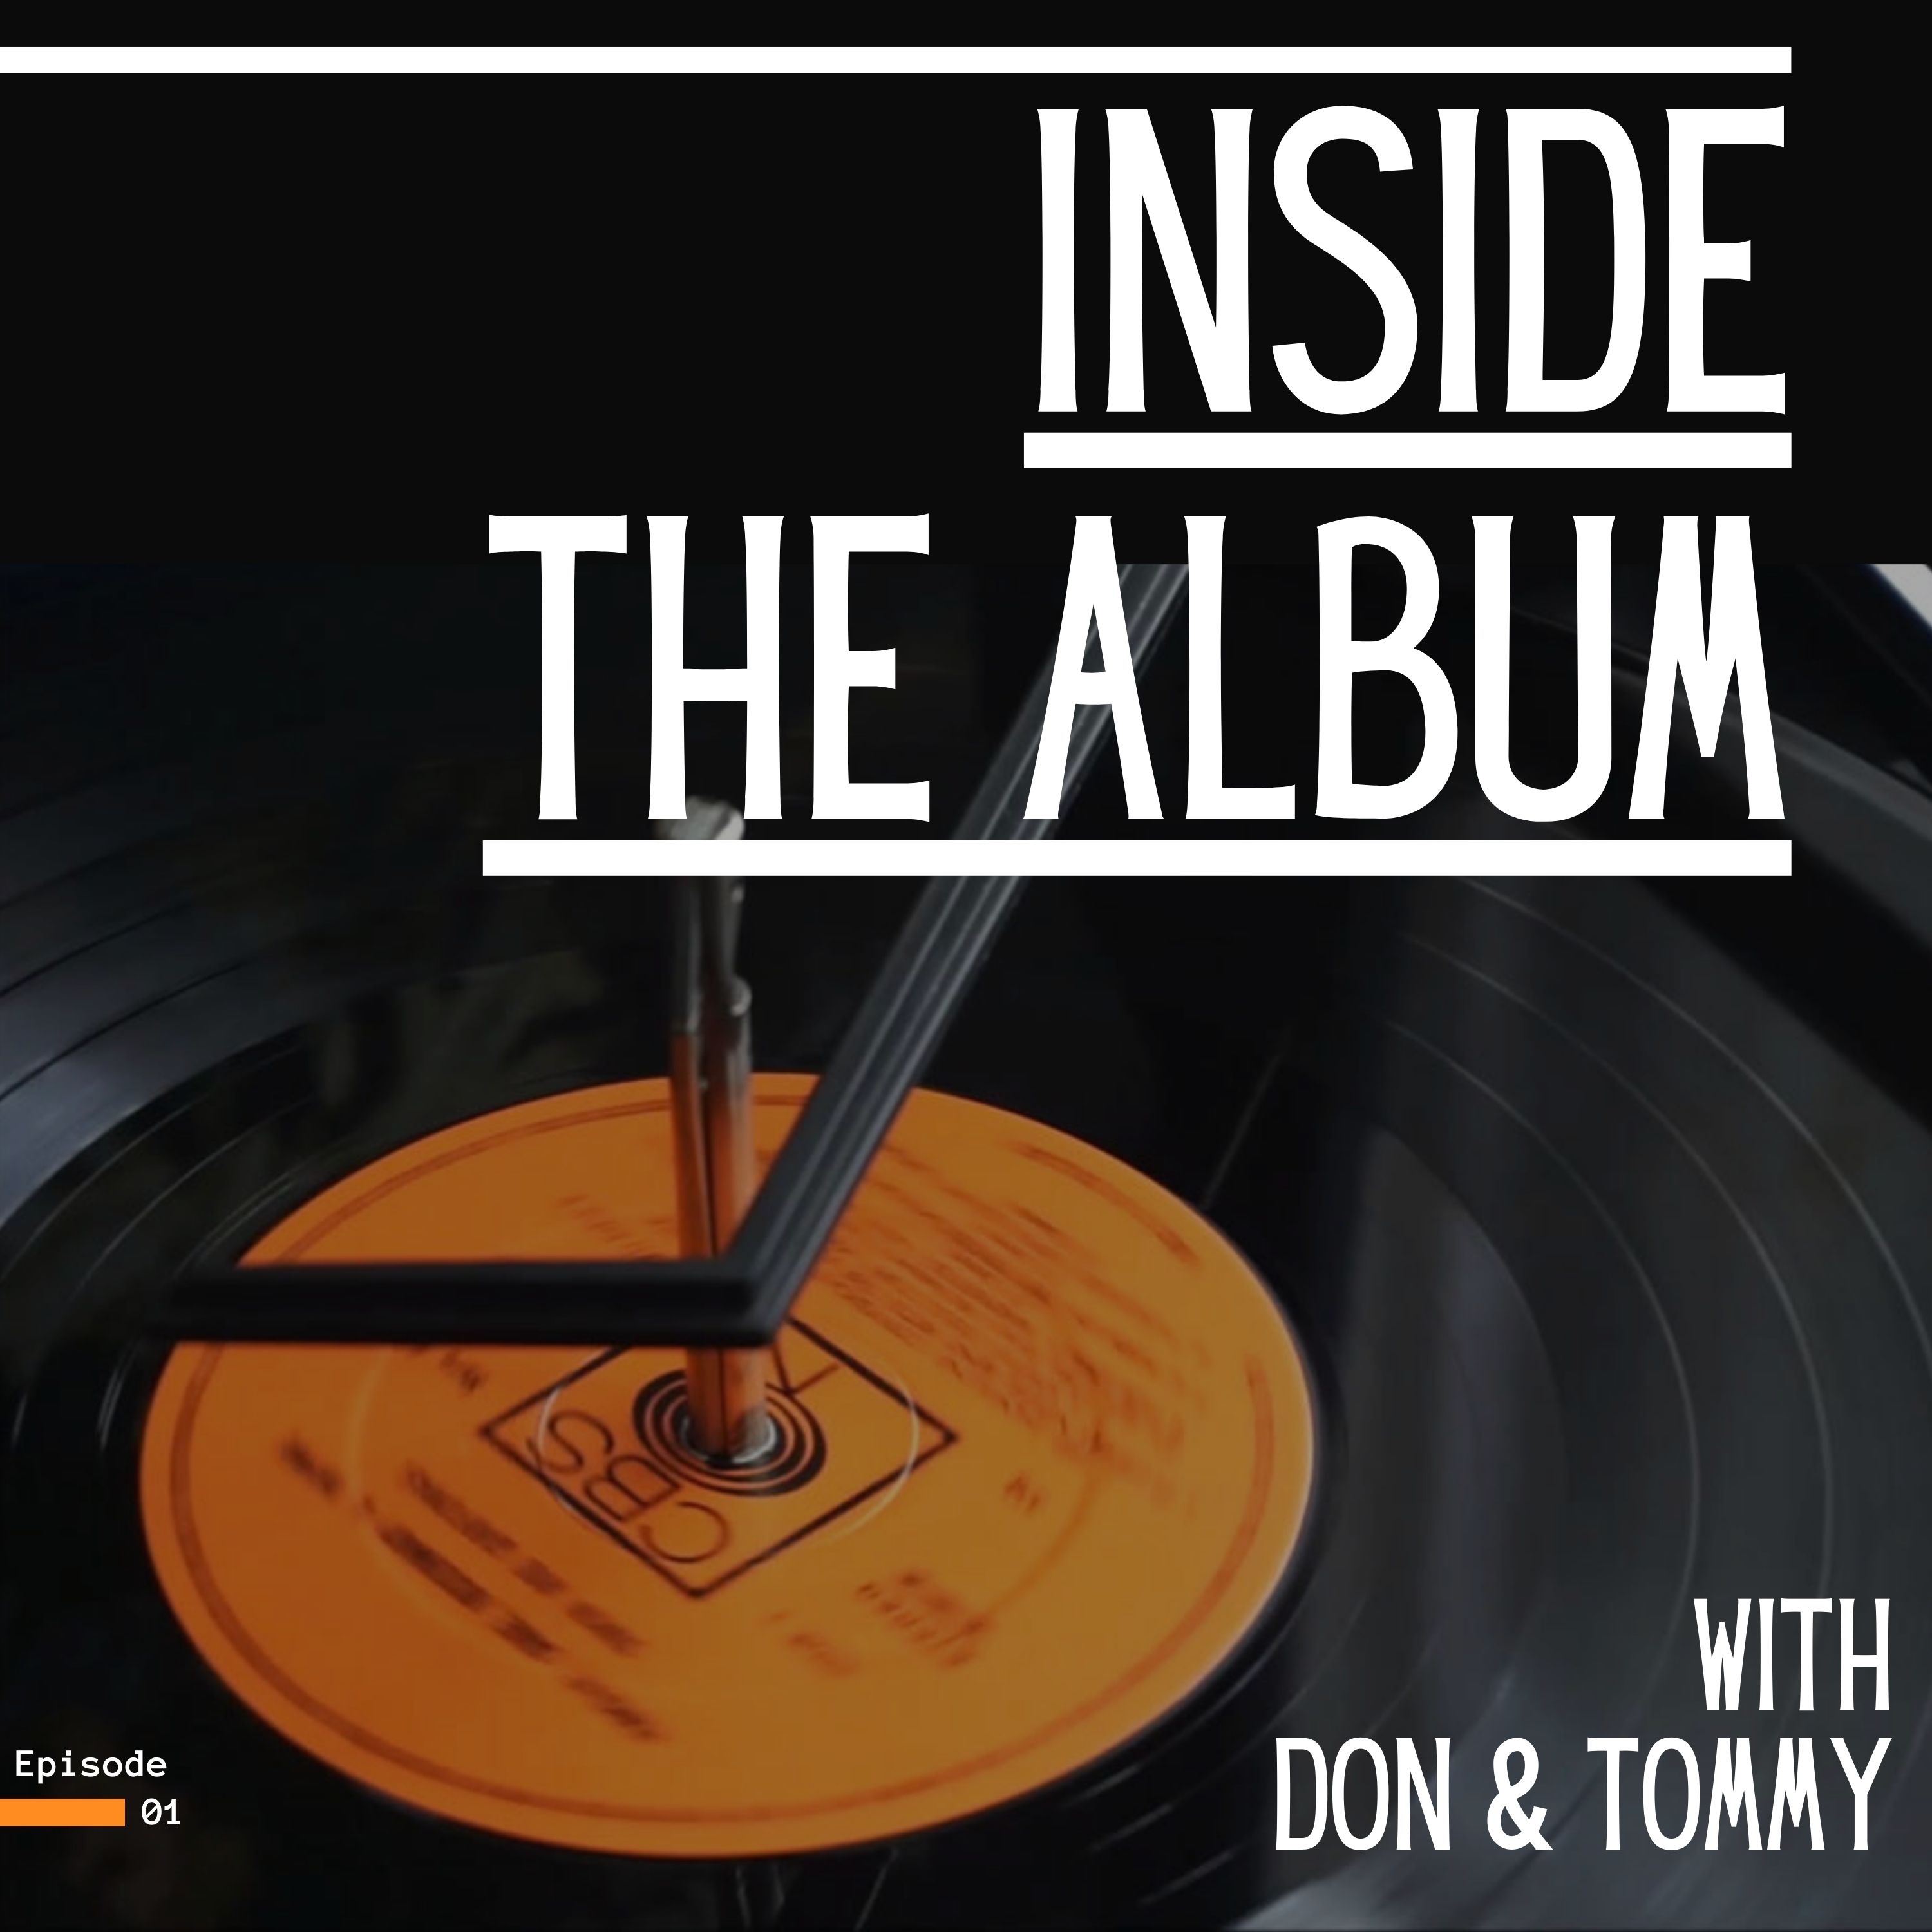 Artwork for Inside The Album with Don & Tommy